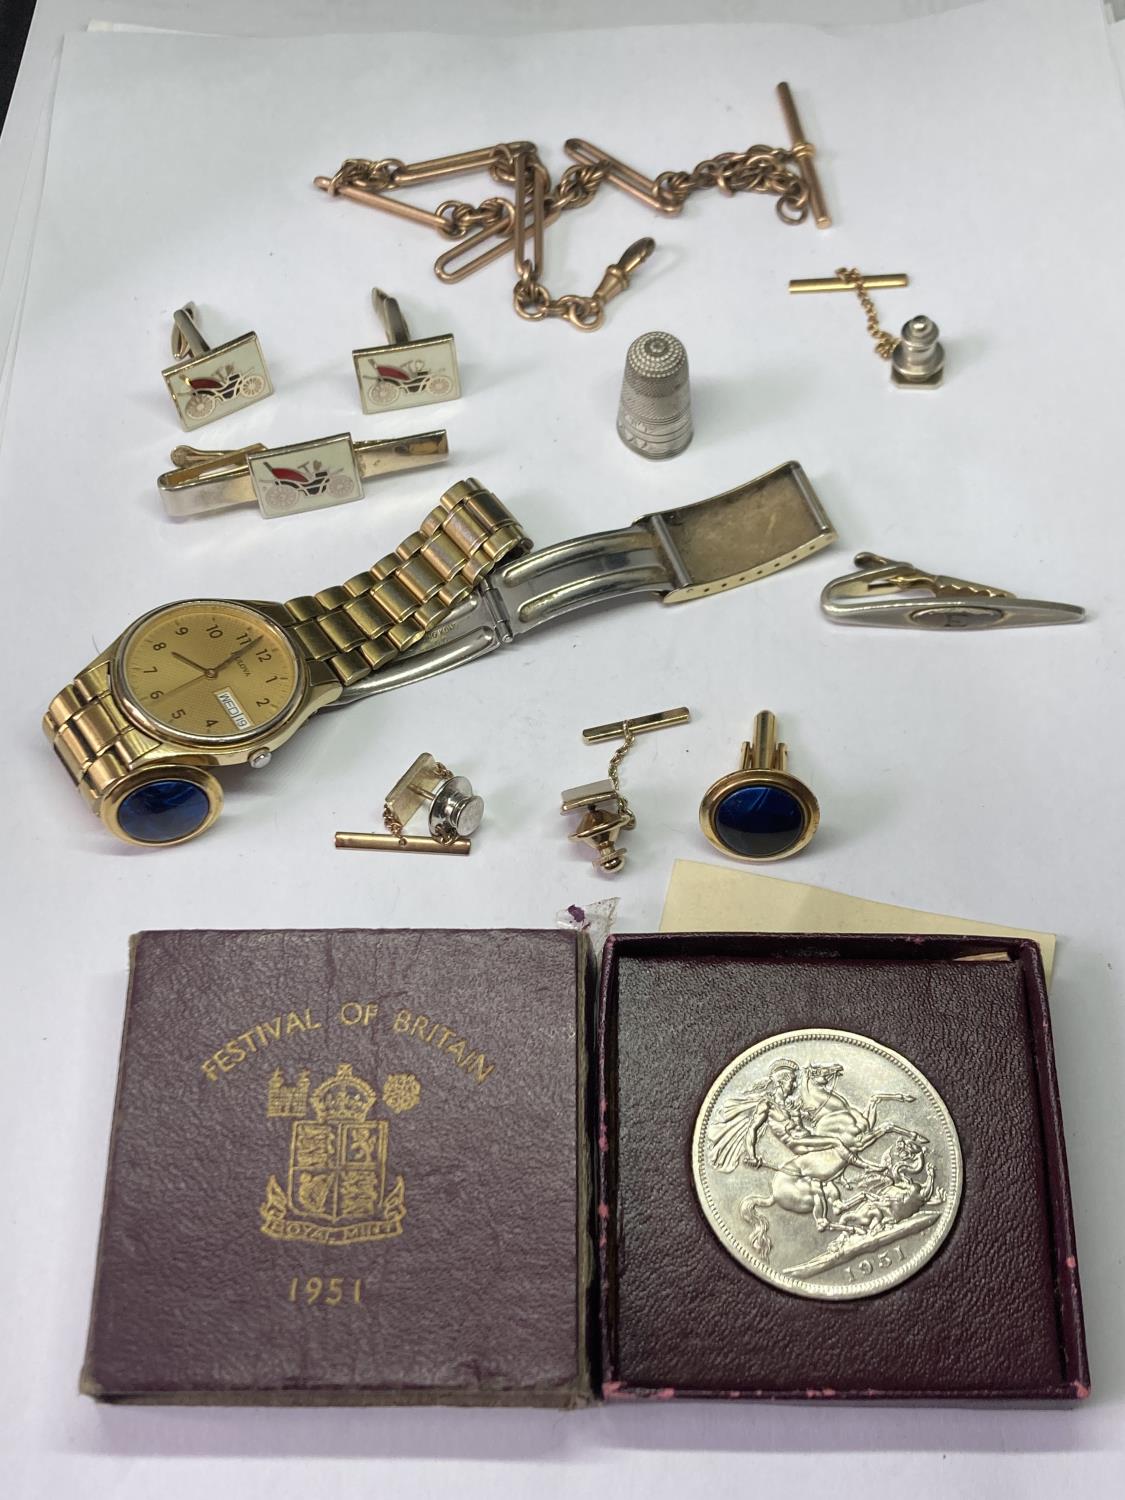 VARIOUS ITEMS TO INCLUDE AN 18 CARAT GOLD PLATED CHAIN, CUFFLINKS, TIE PINS, BOXED FESTIVAL OF